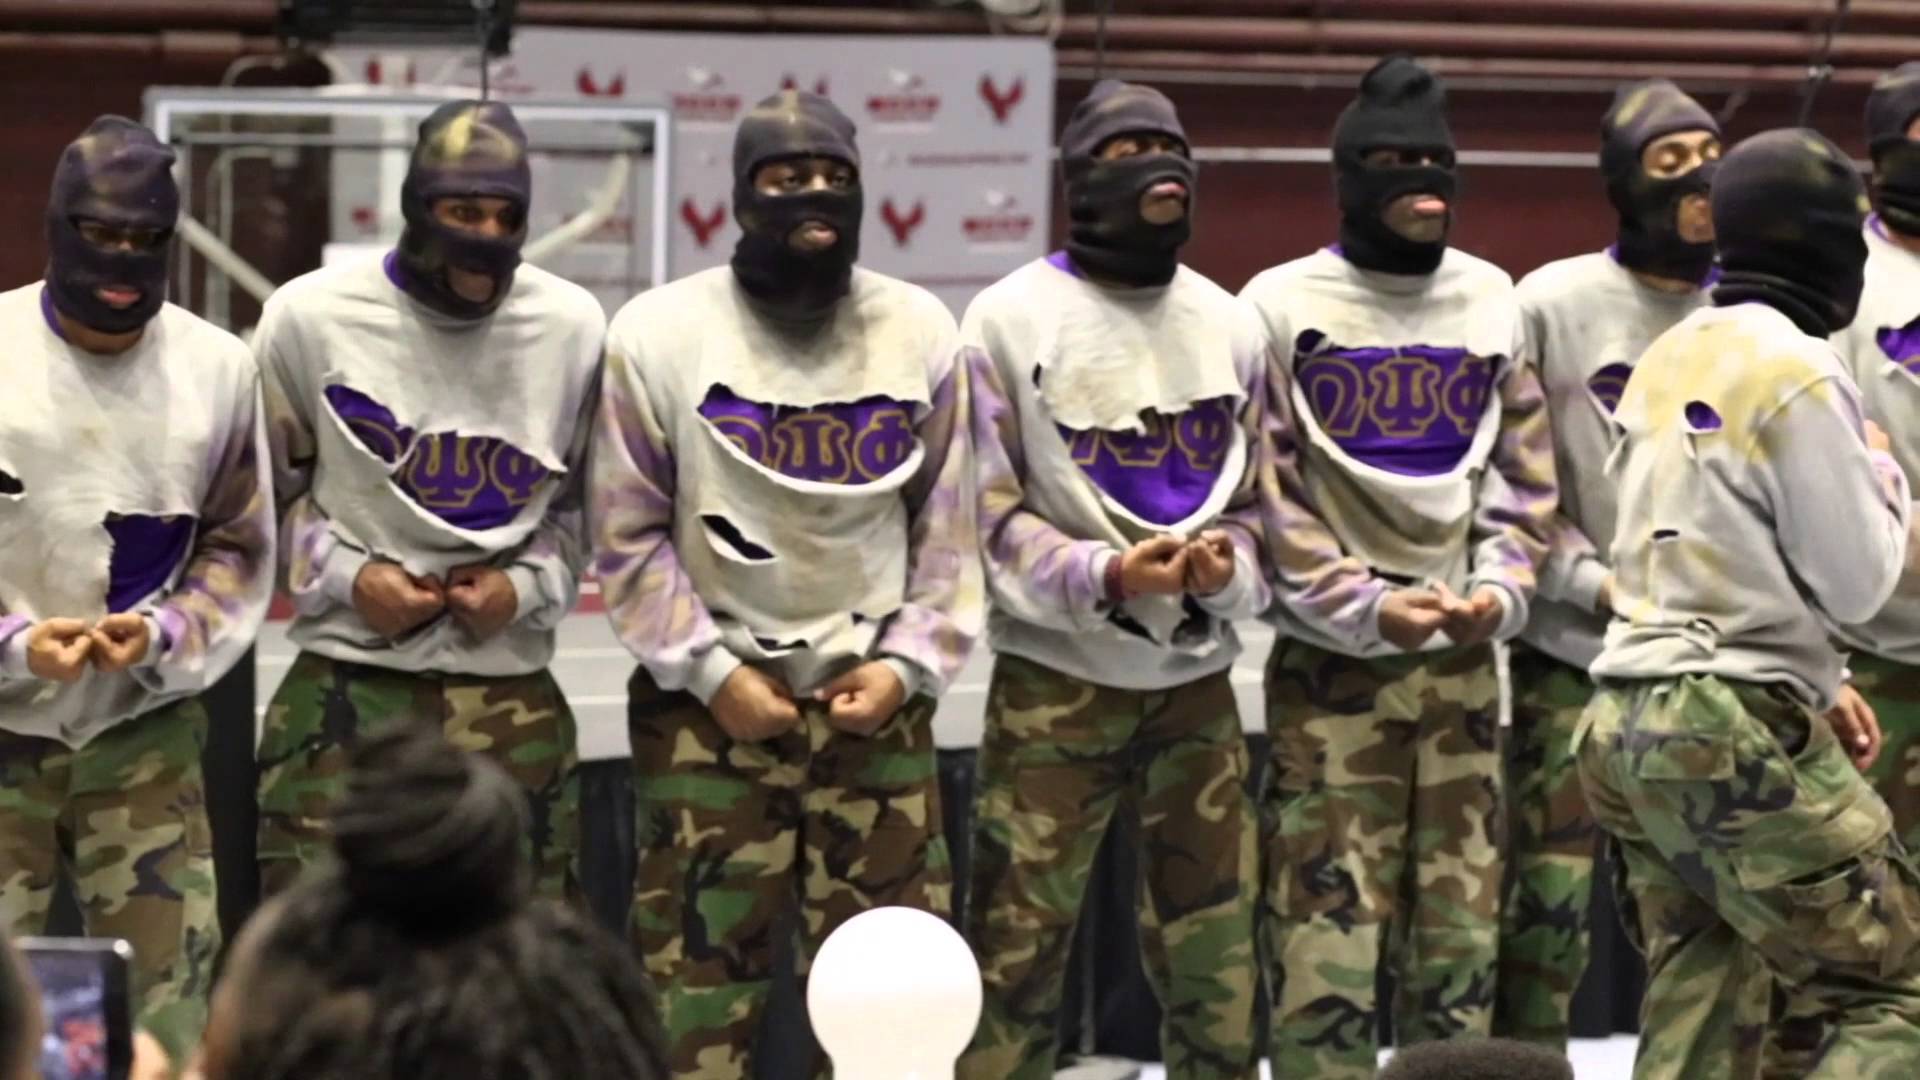 omega psi phi wallpapers,army,military,military camouflage,games,soldier